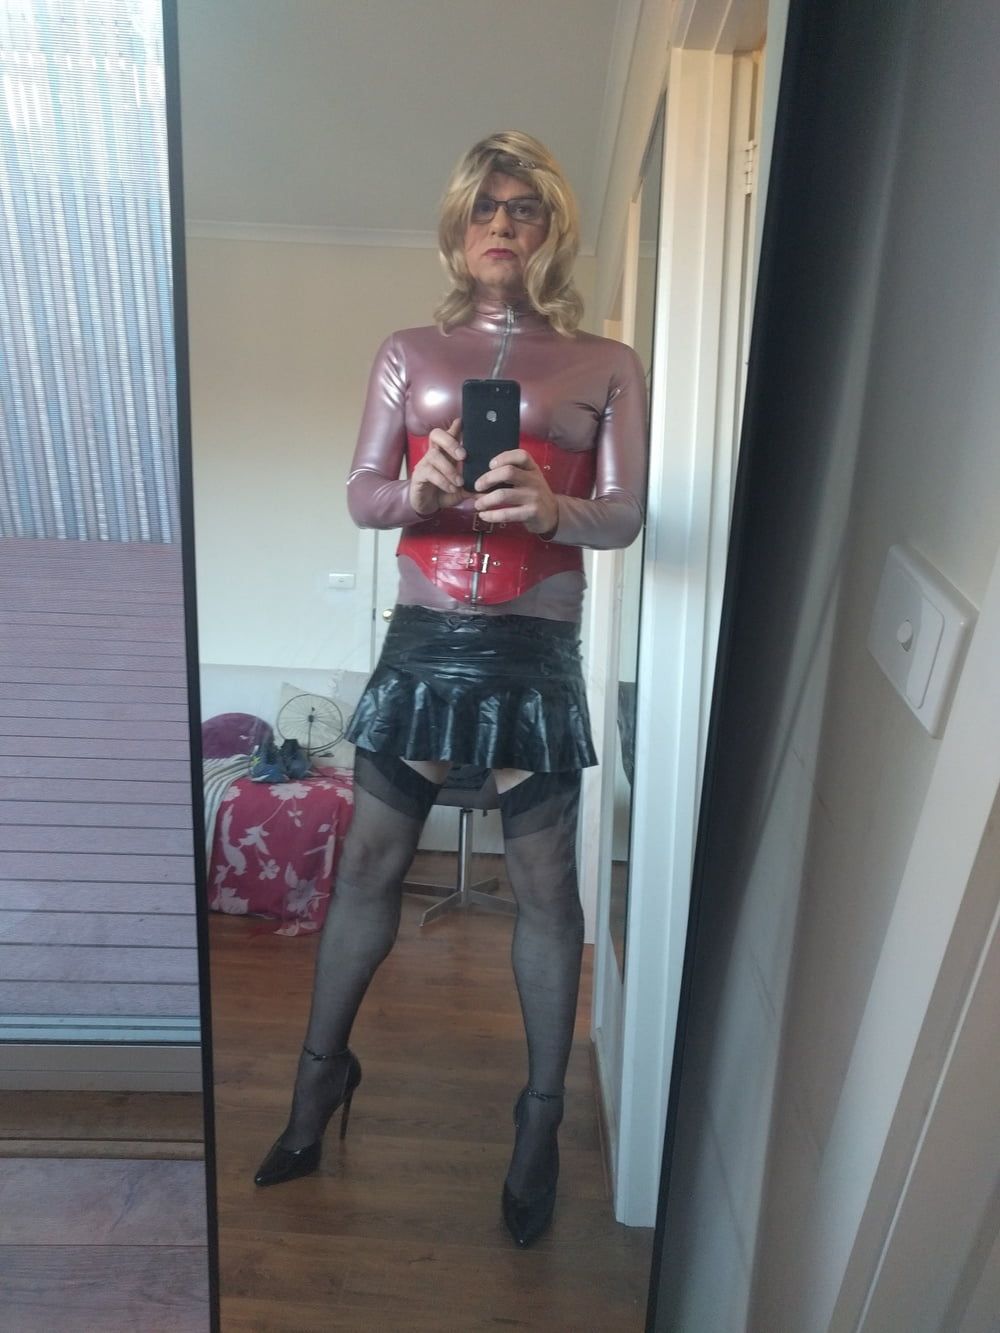 Back as a short blonde latex girl